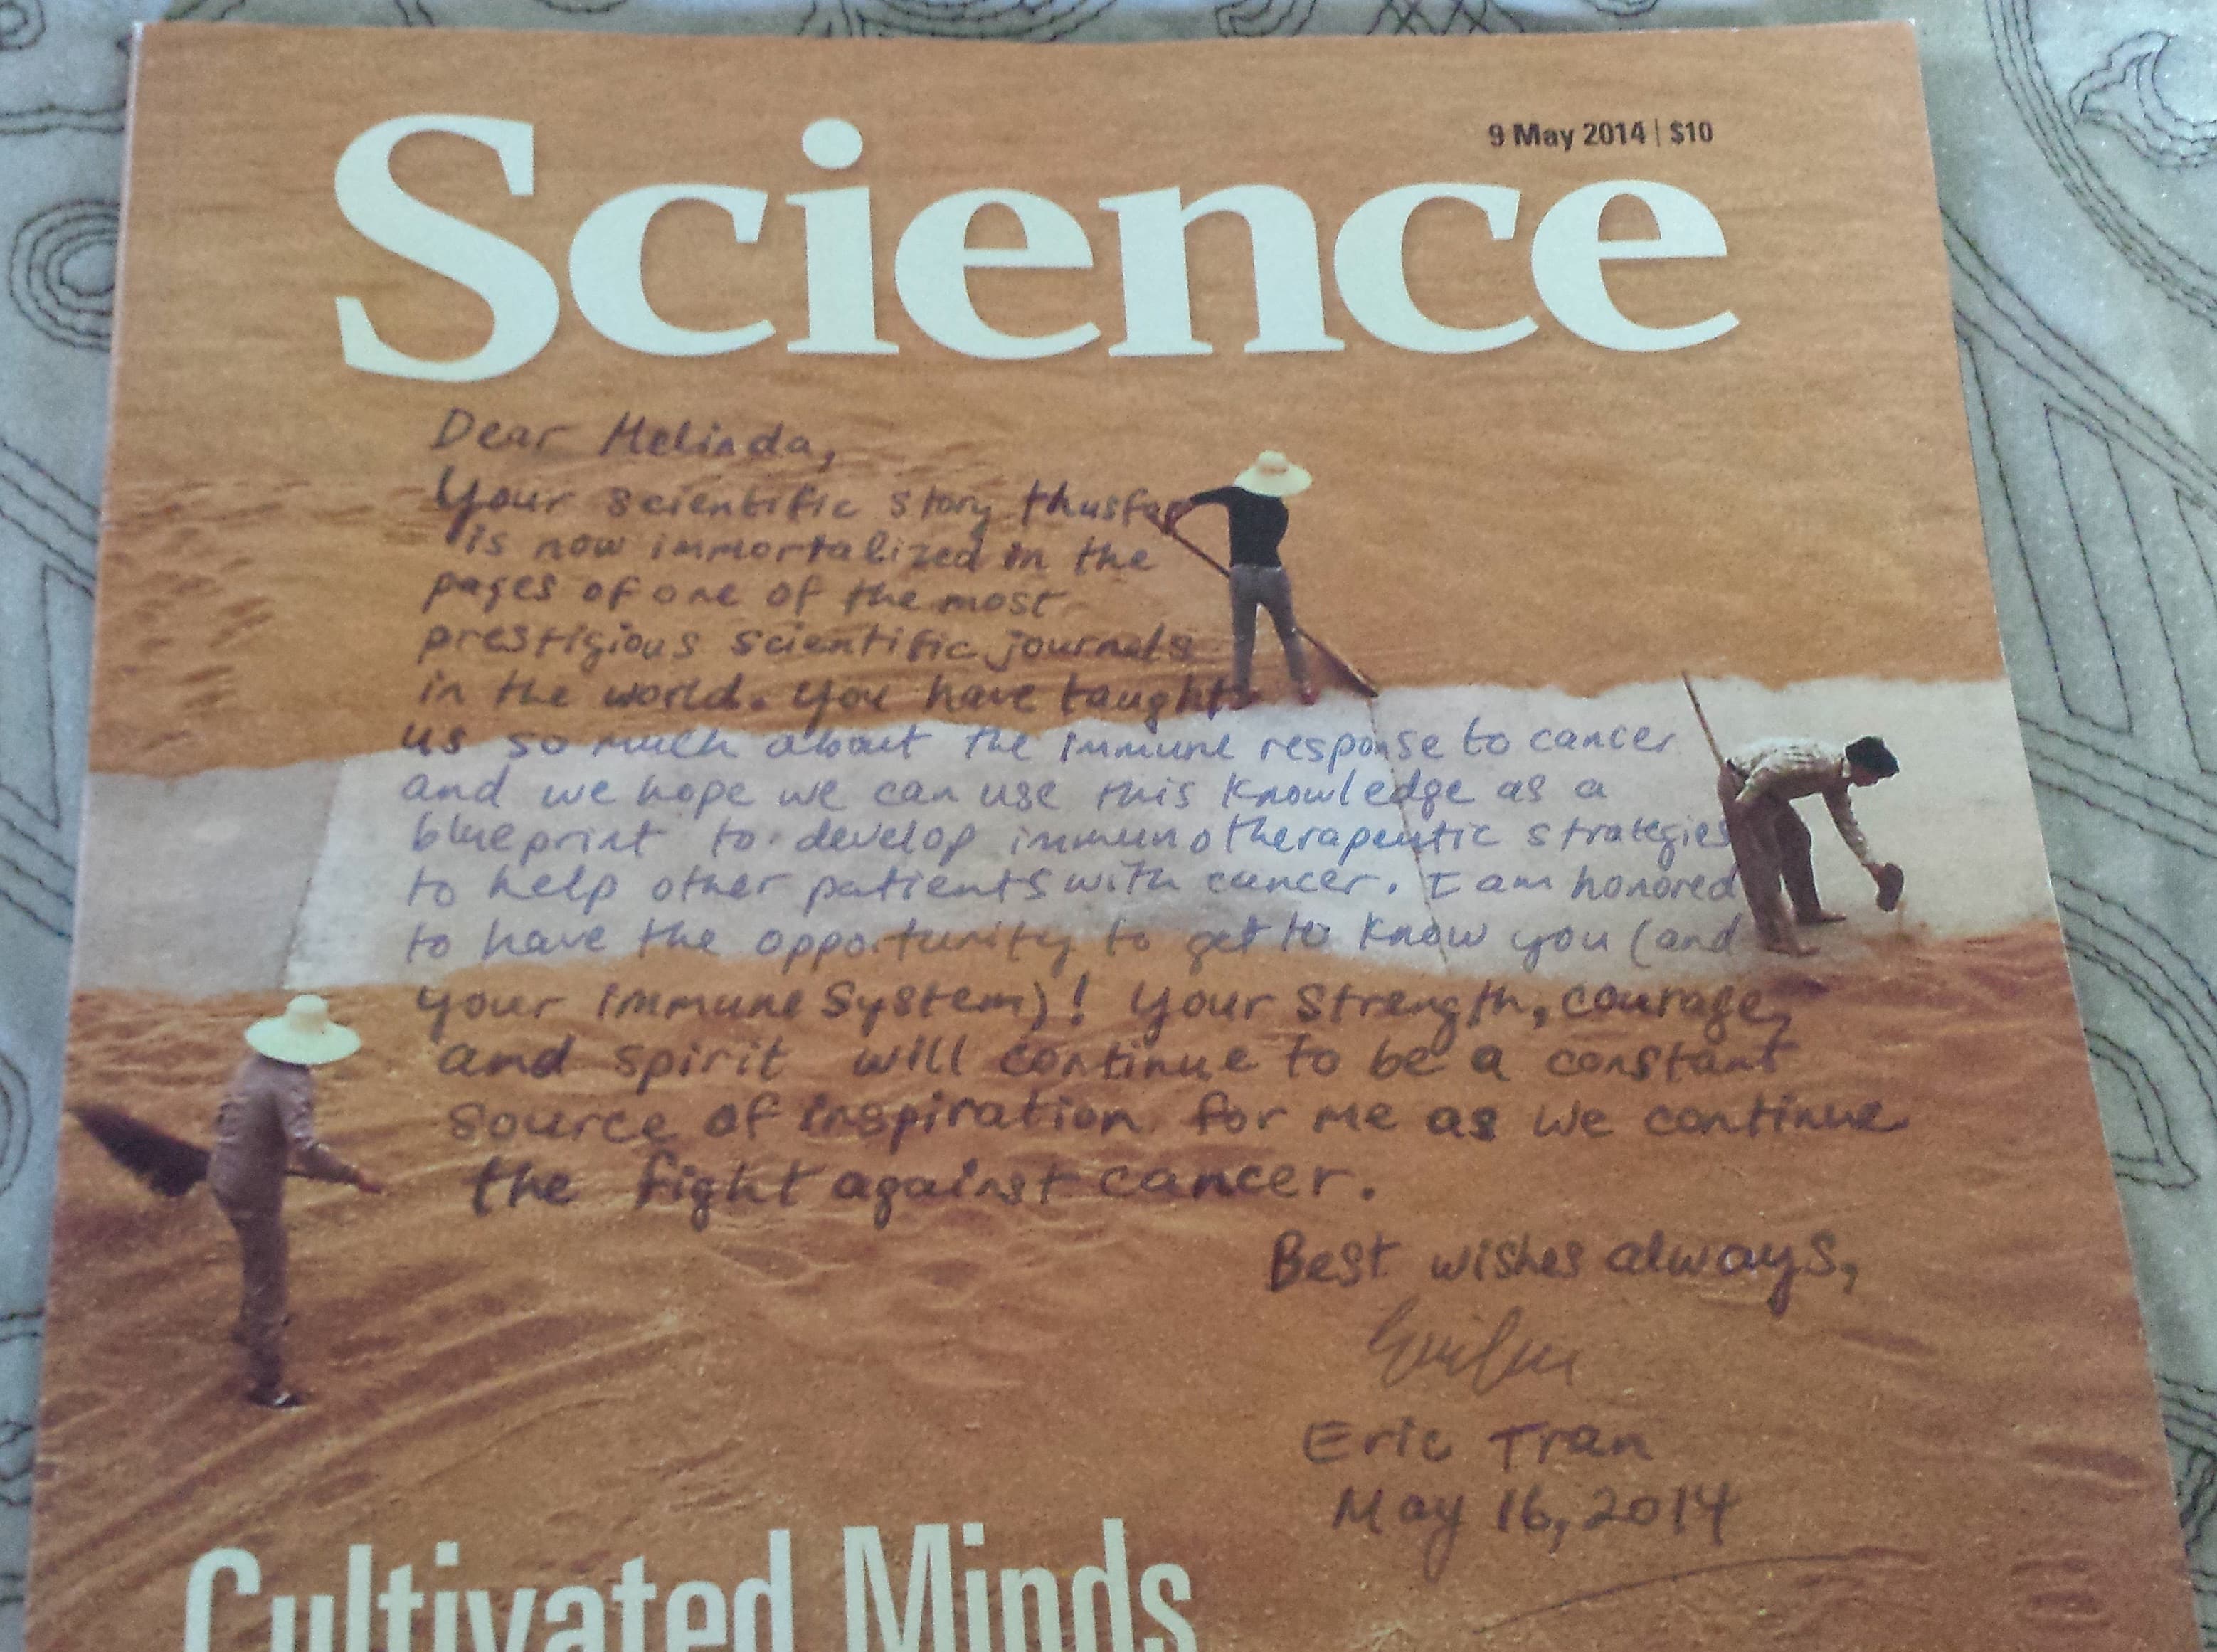 Message written by Dr. Tran on the cover of a Science magazine